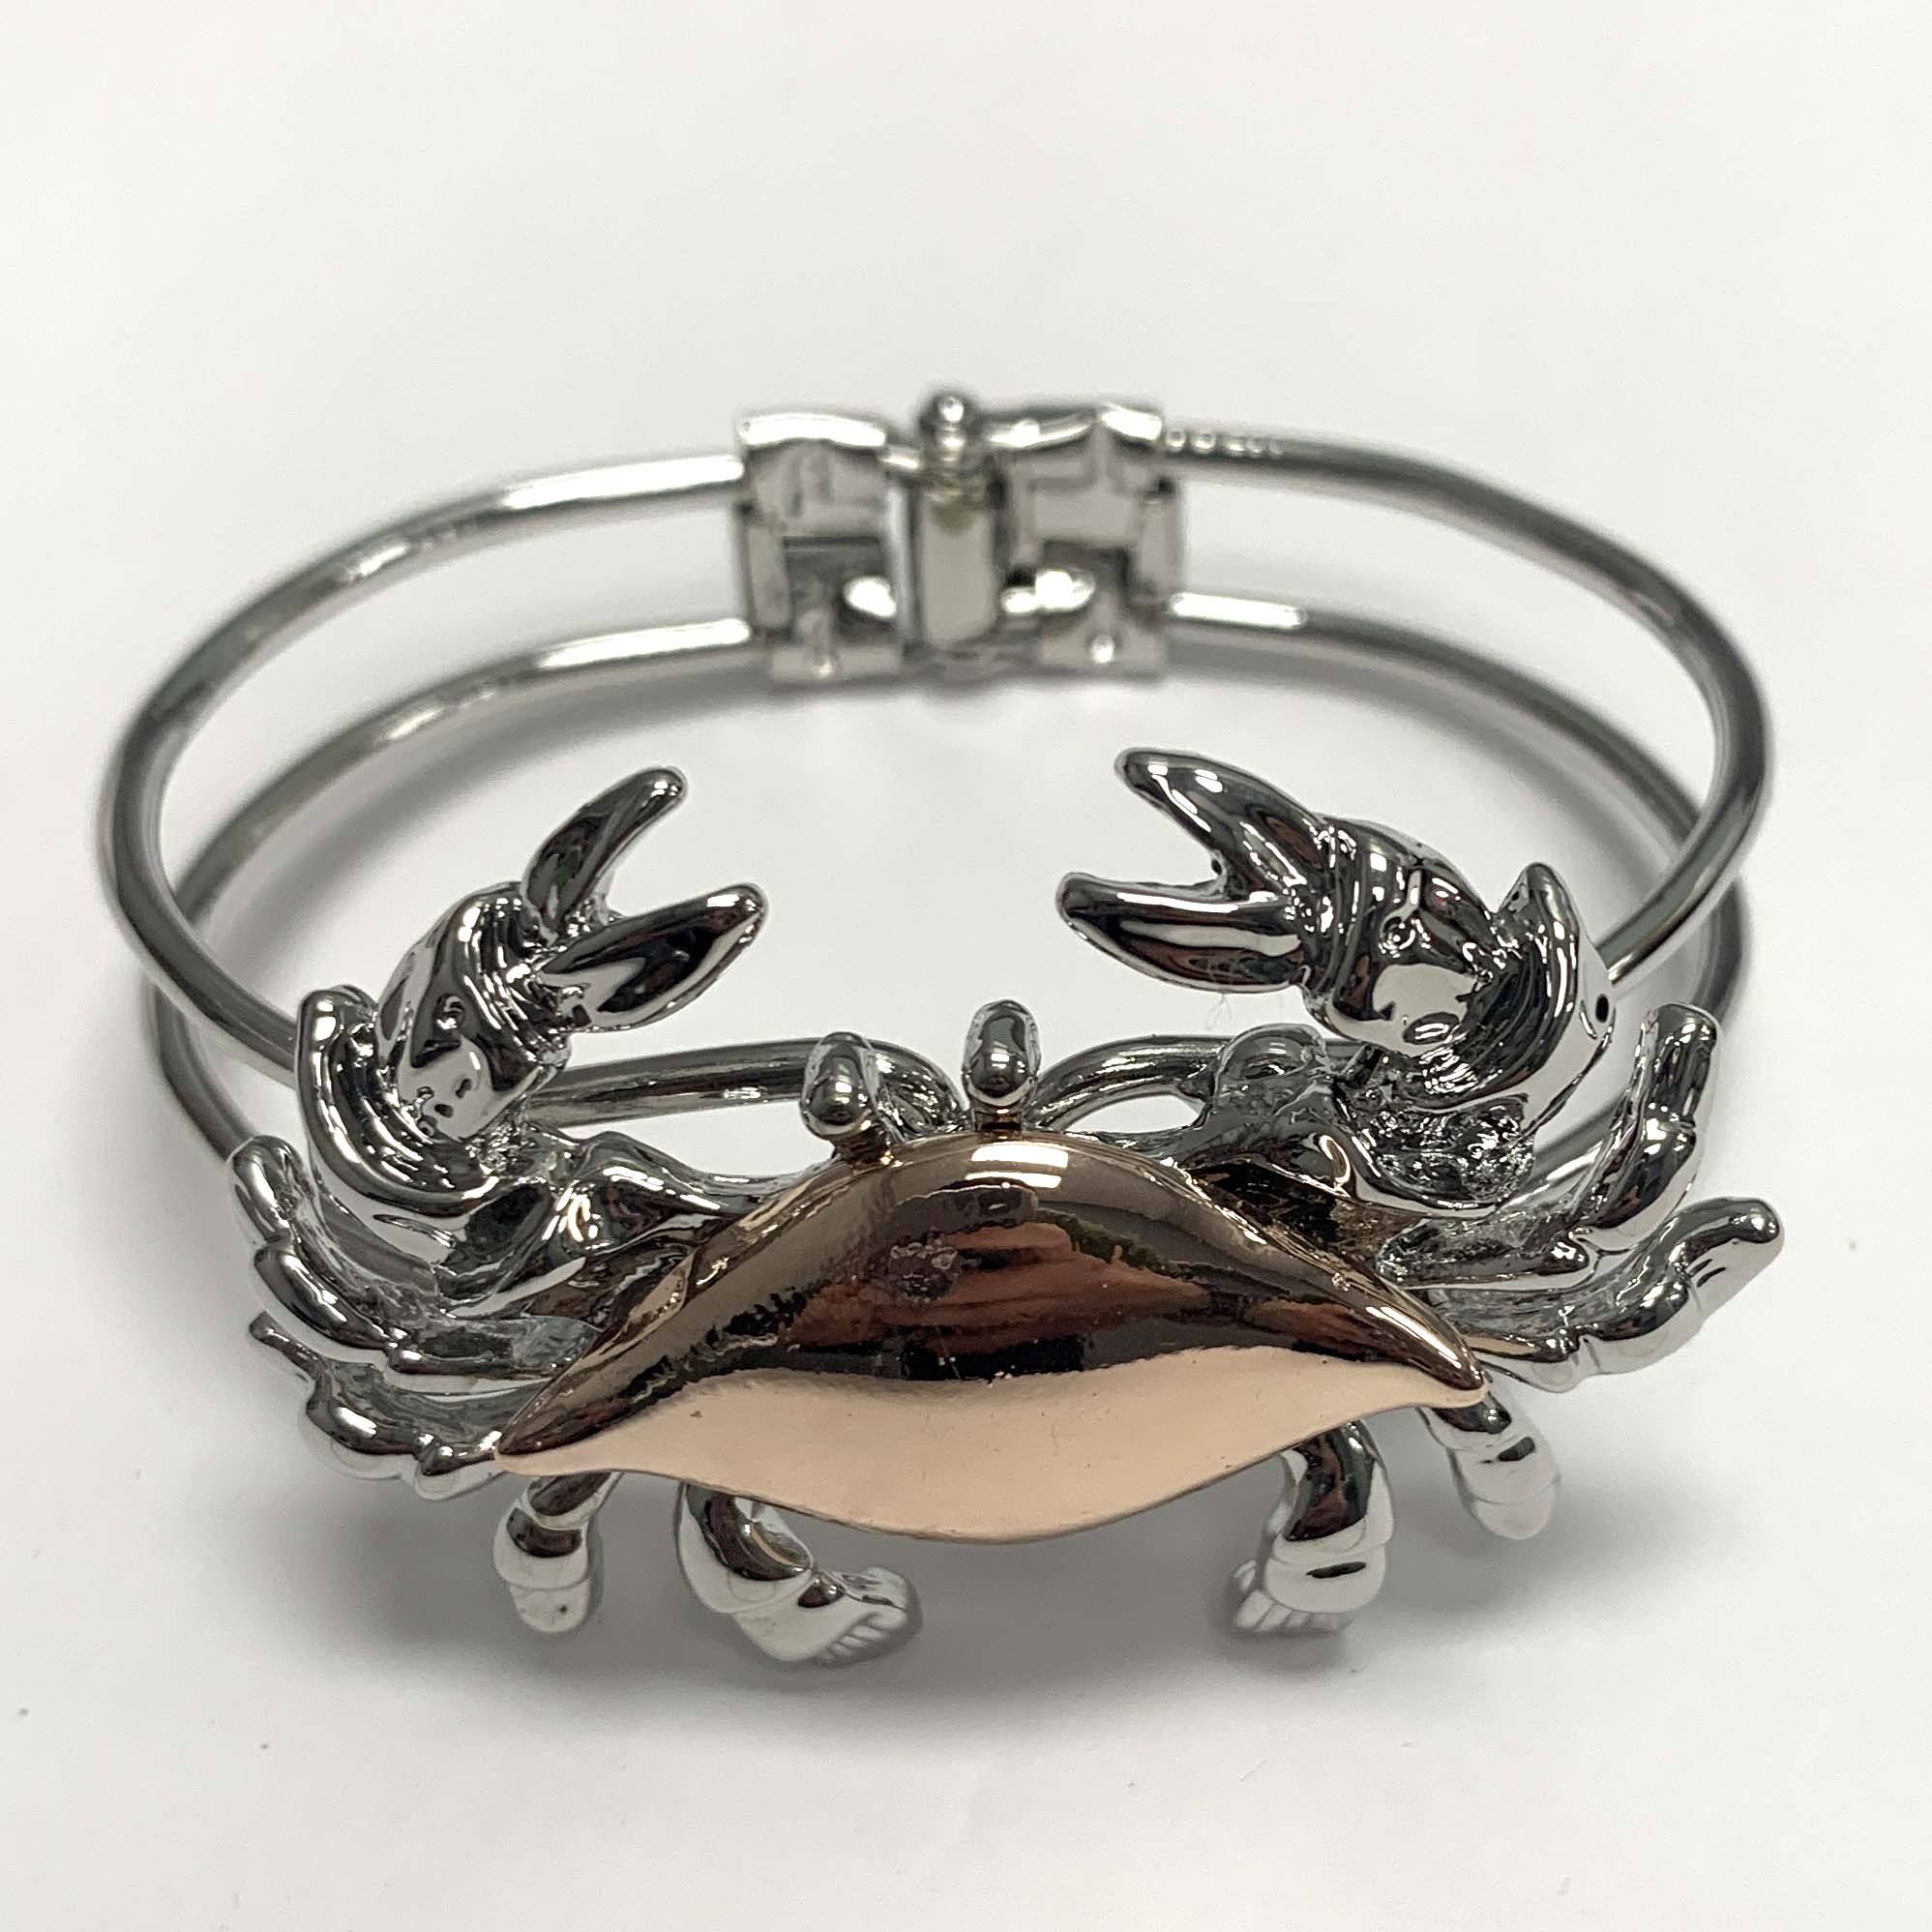 Crab (Copper Plated) / Cuff Bracelet - Route One Apparel